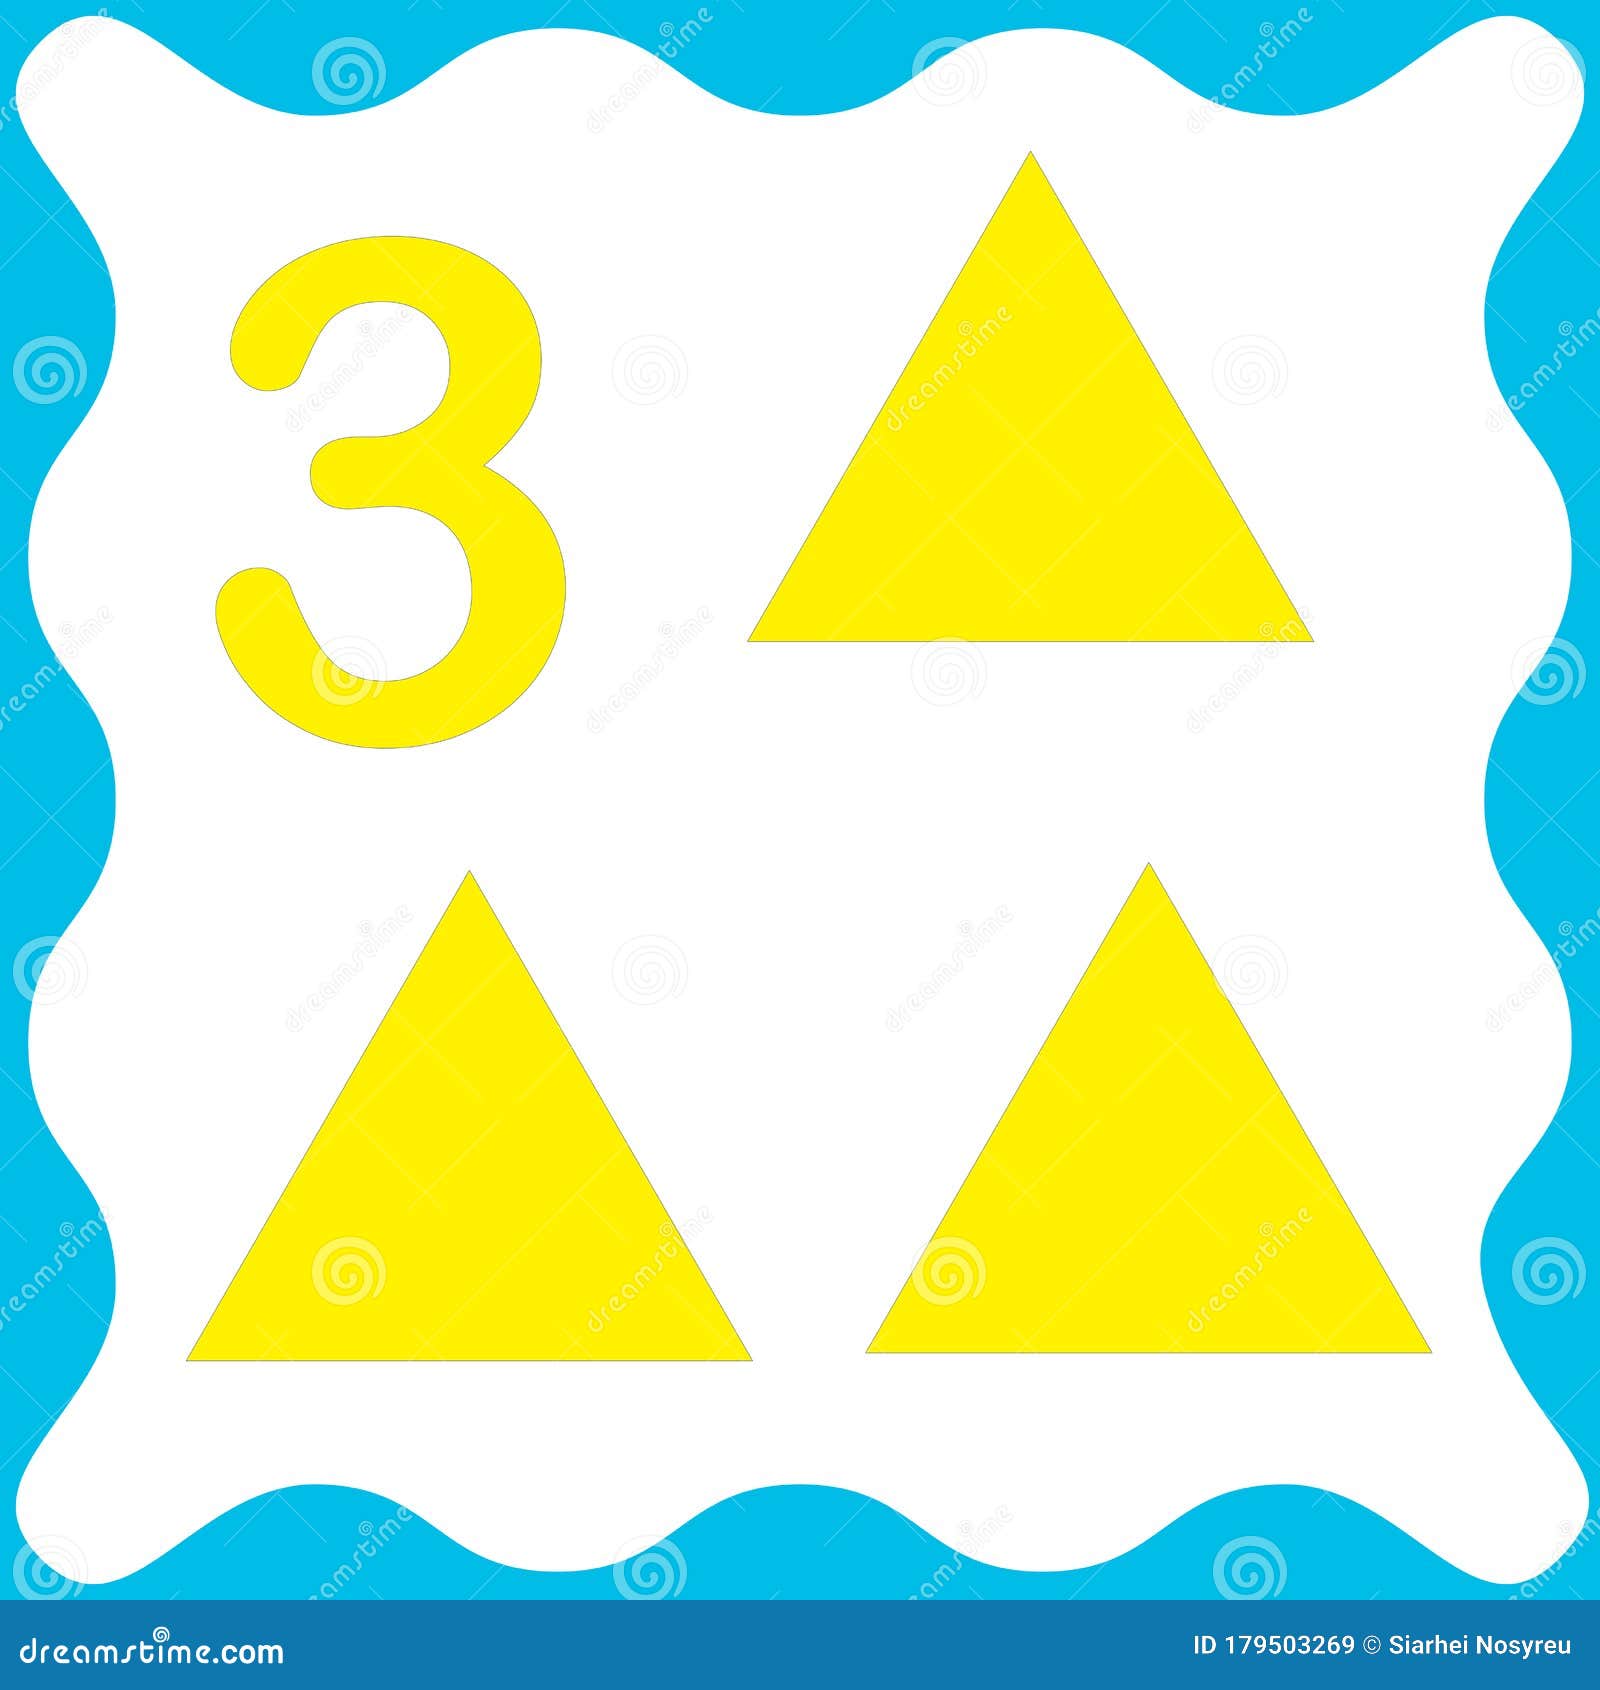 Card Number 3 Three And Triangle Learning Numbers And Geometric Shapes Mathematics Game For Children Vector Illustration Stock Vector Illustration Of Baby Children